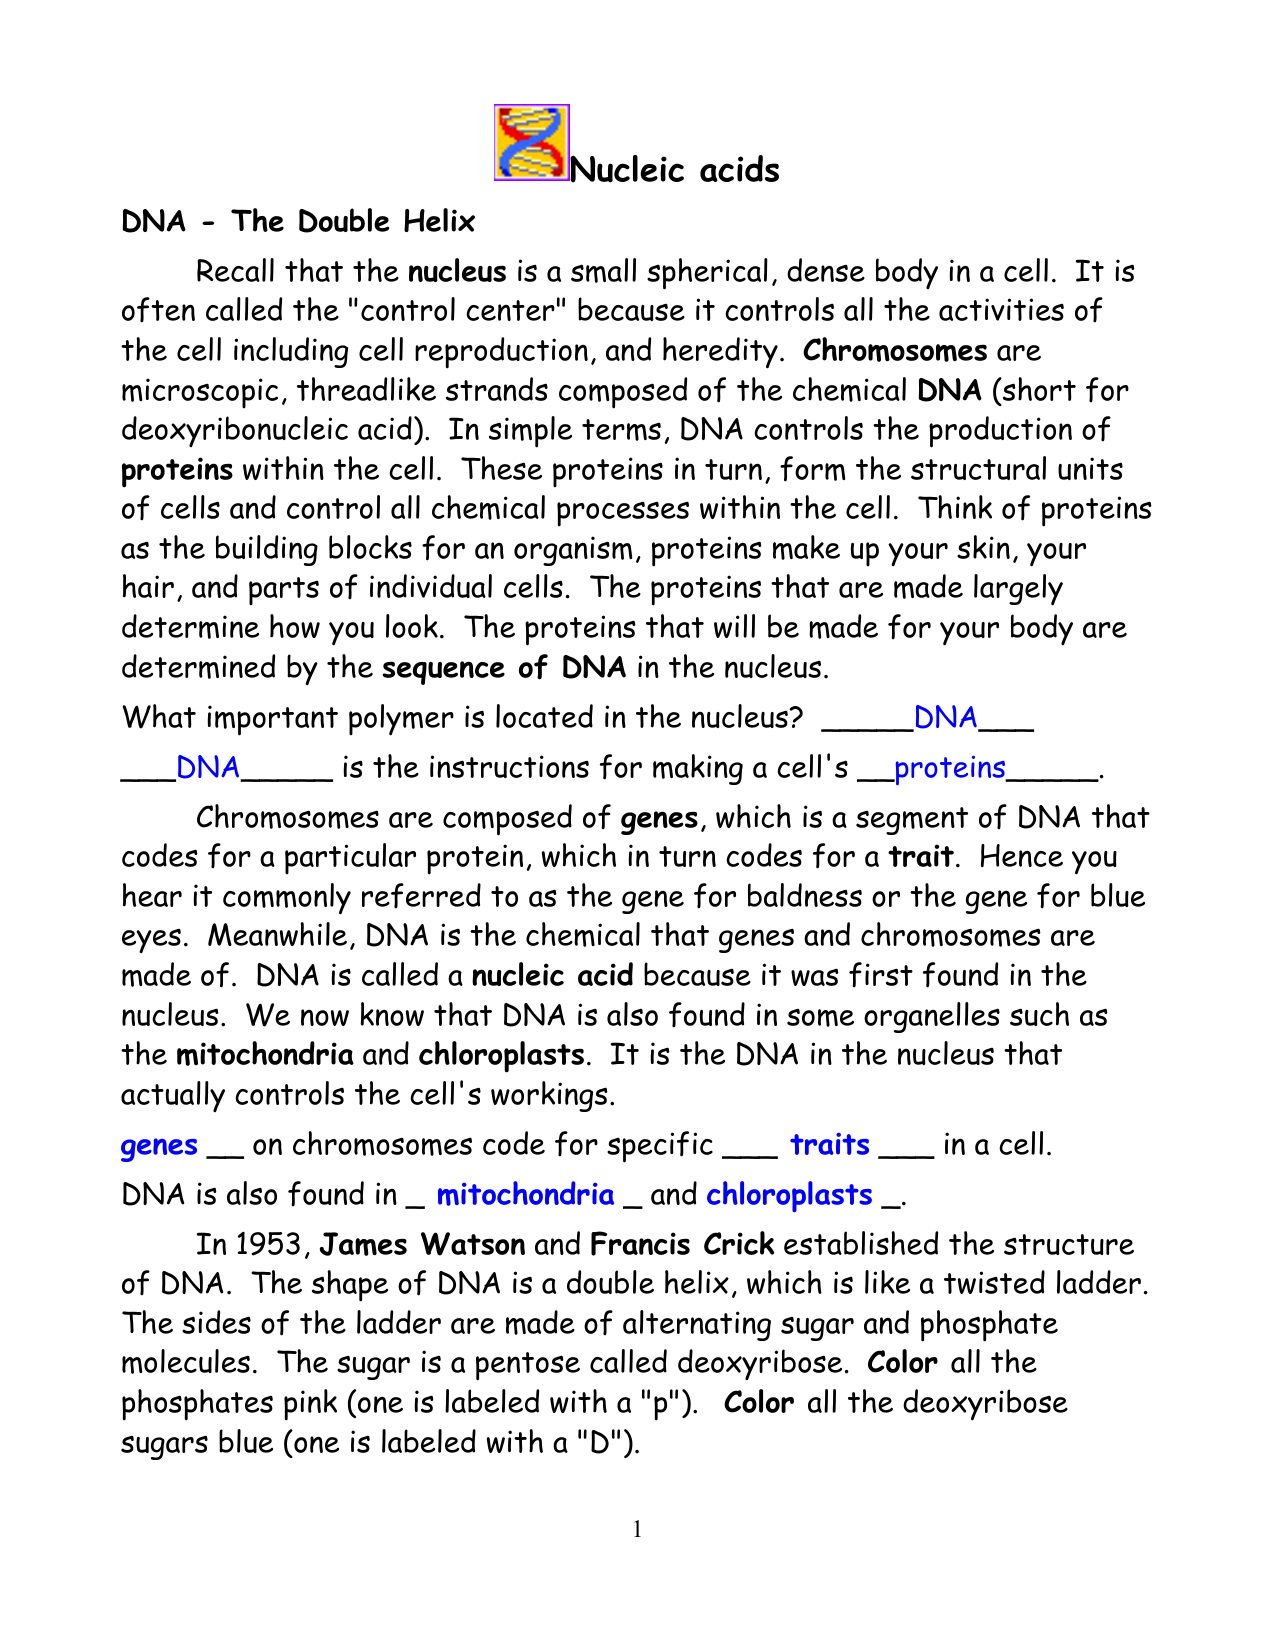 DNA Double Helix KEY For Dna The Double Helix Worksheet